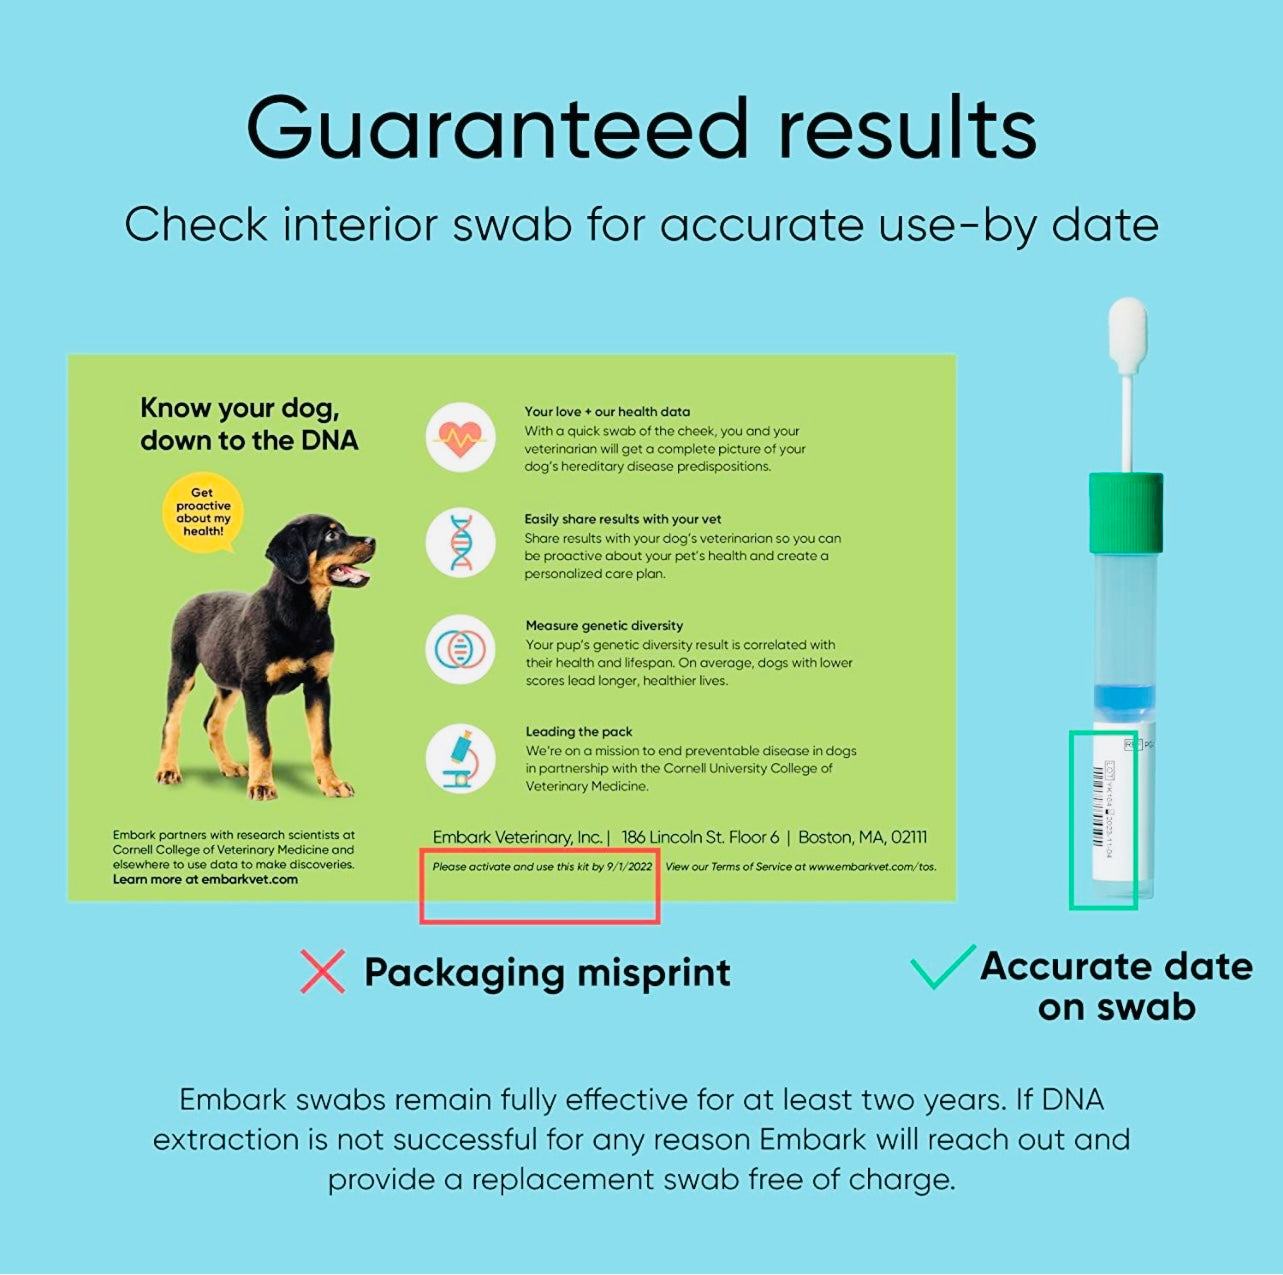 Embark | Dog DNA Test for Purebred Pets | Canine Genetic Health Screening & Genetic Diversity Score-Fast, Trusted Results